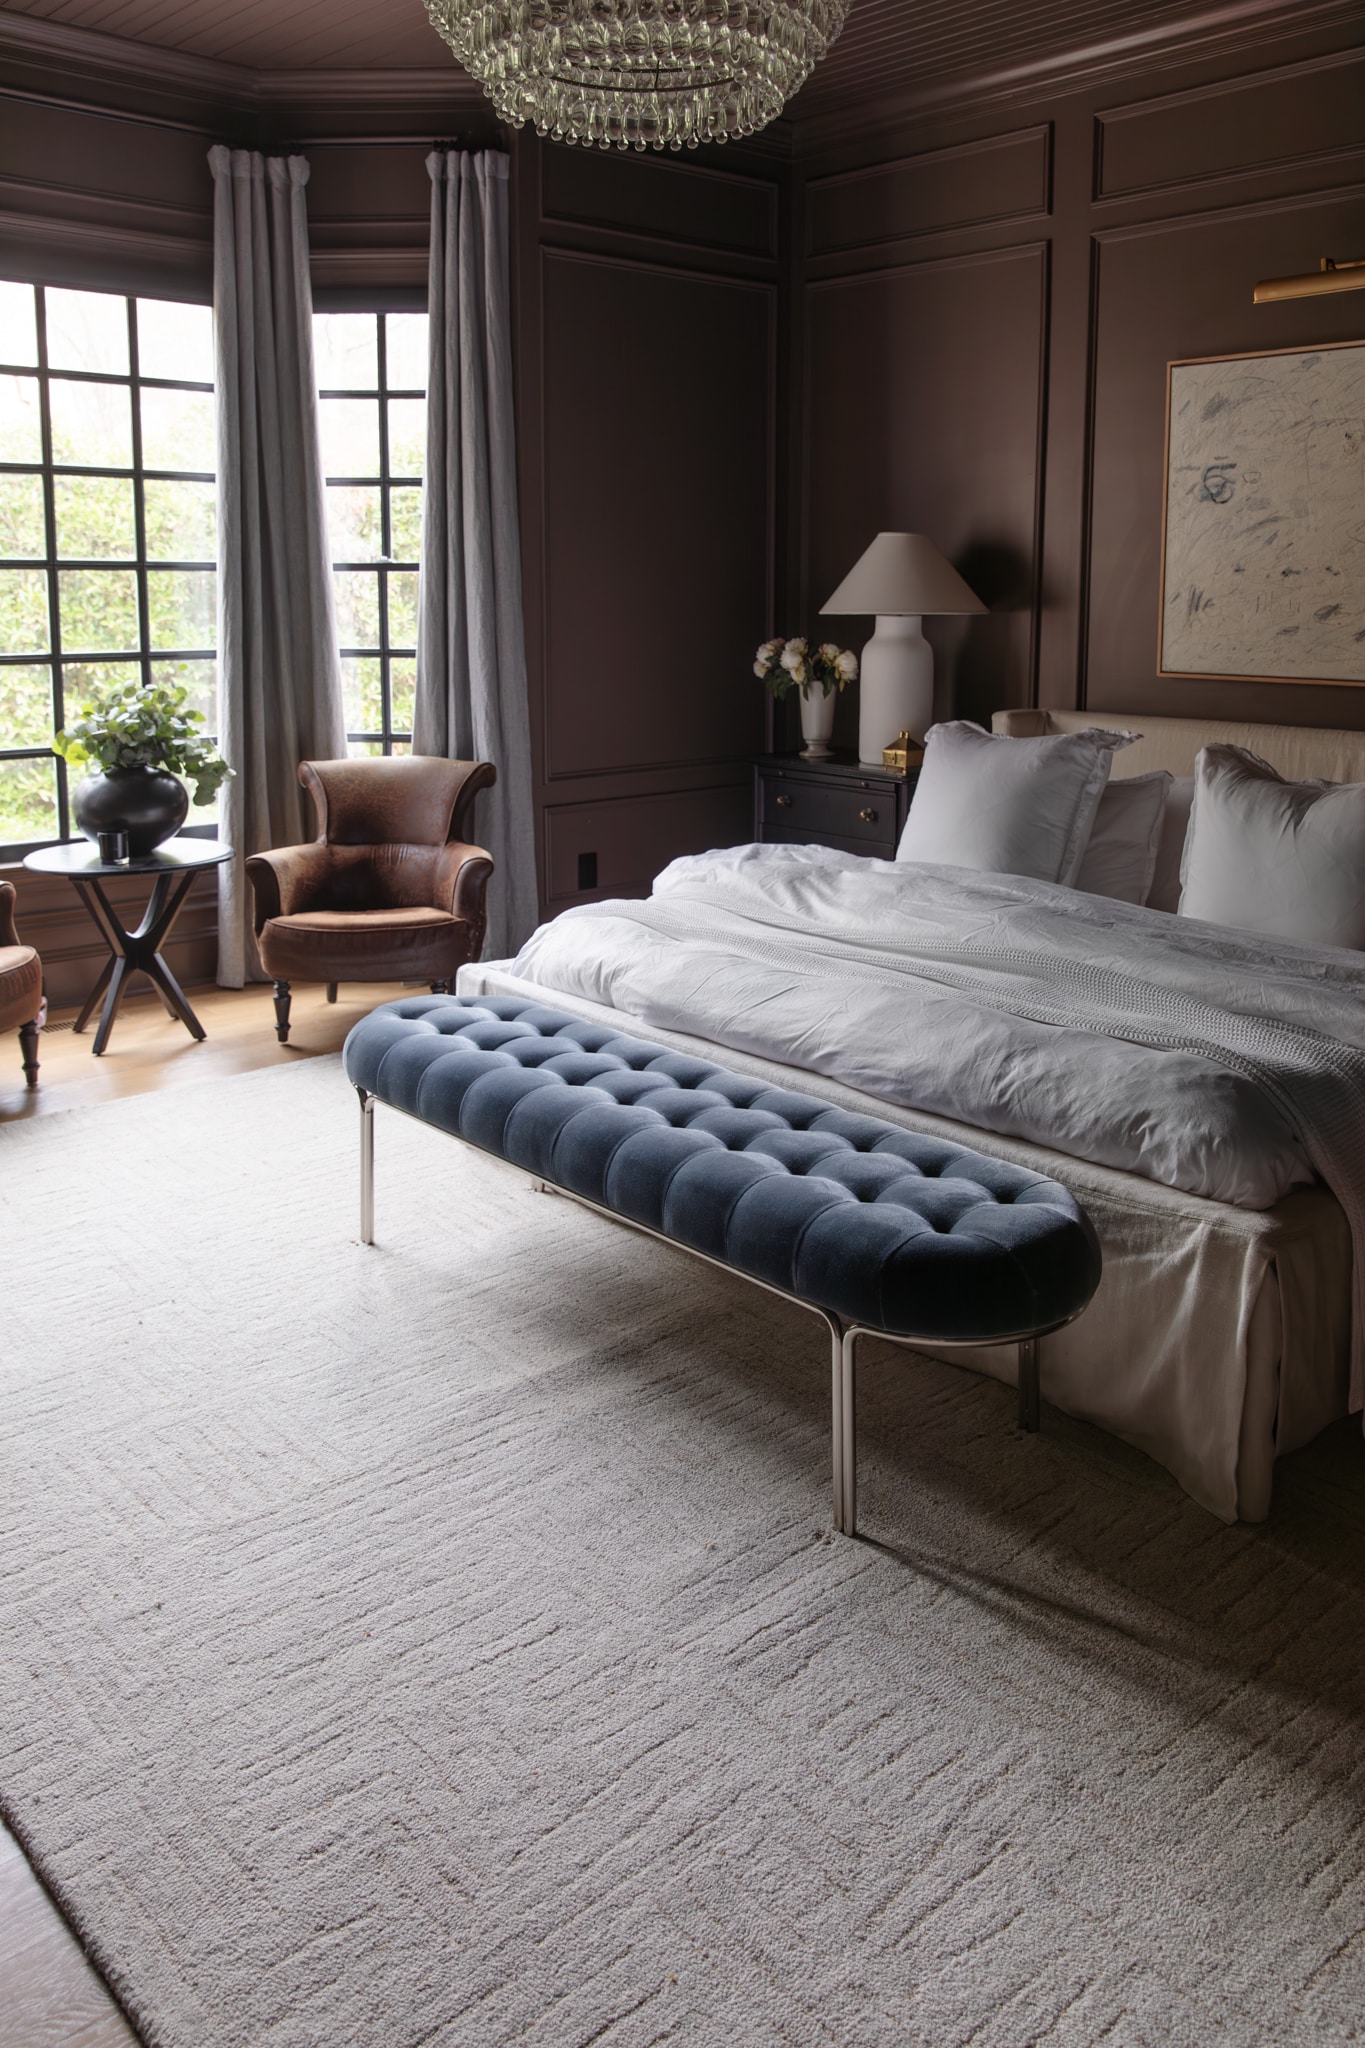 Chris Loves Julia | Defining My Design Style: Moody Modern Traditional | The Bedroom